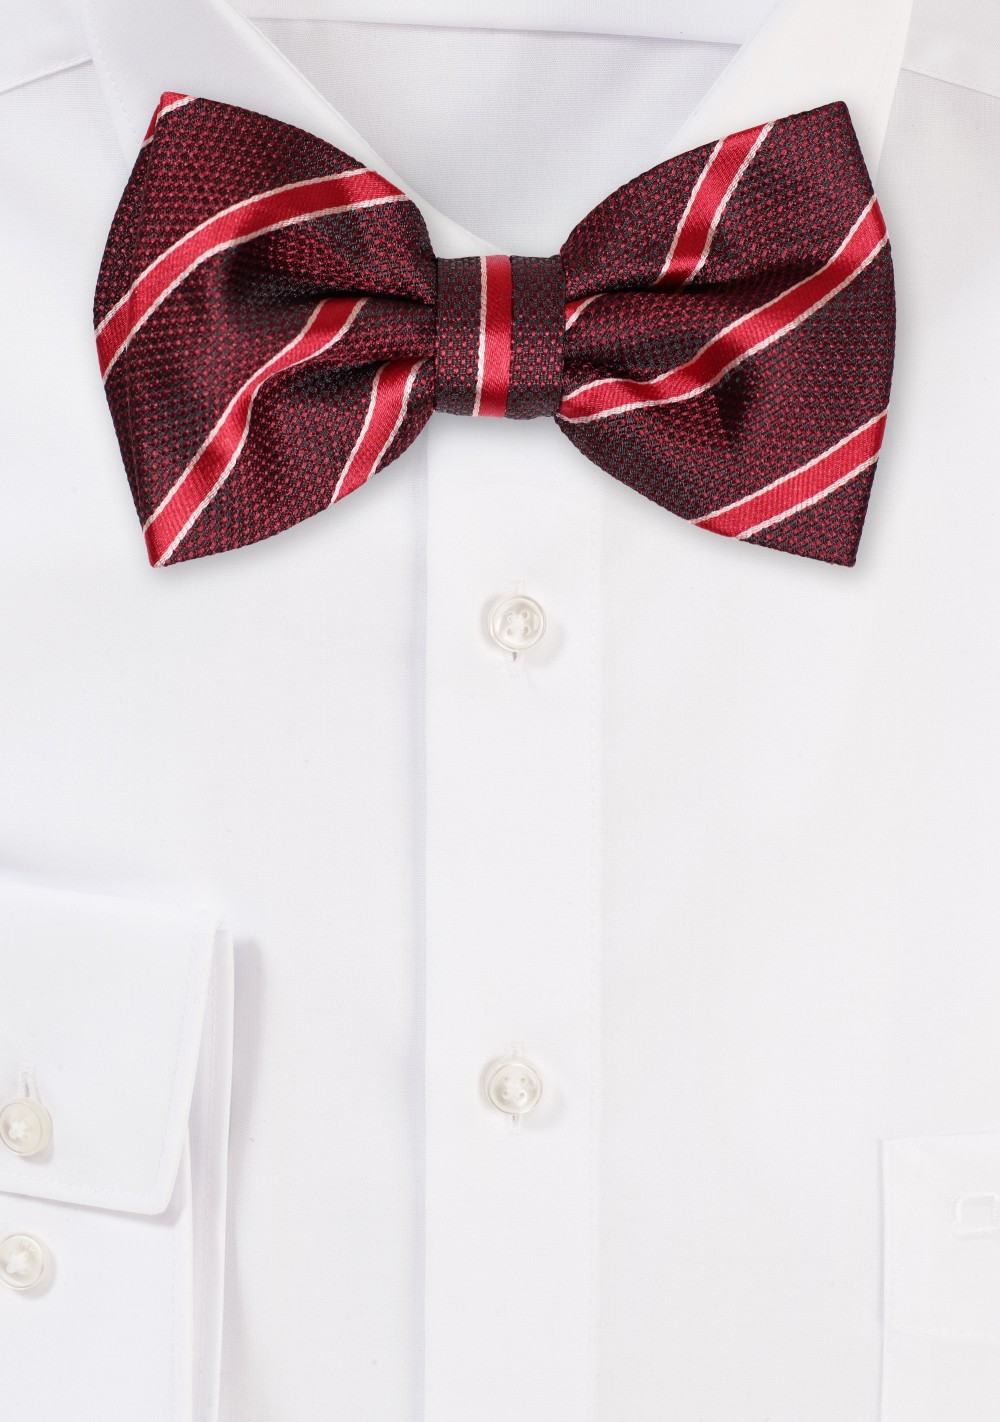 Burgundy and Red Striped Bowtie